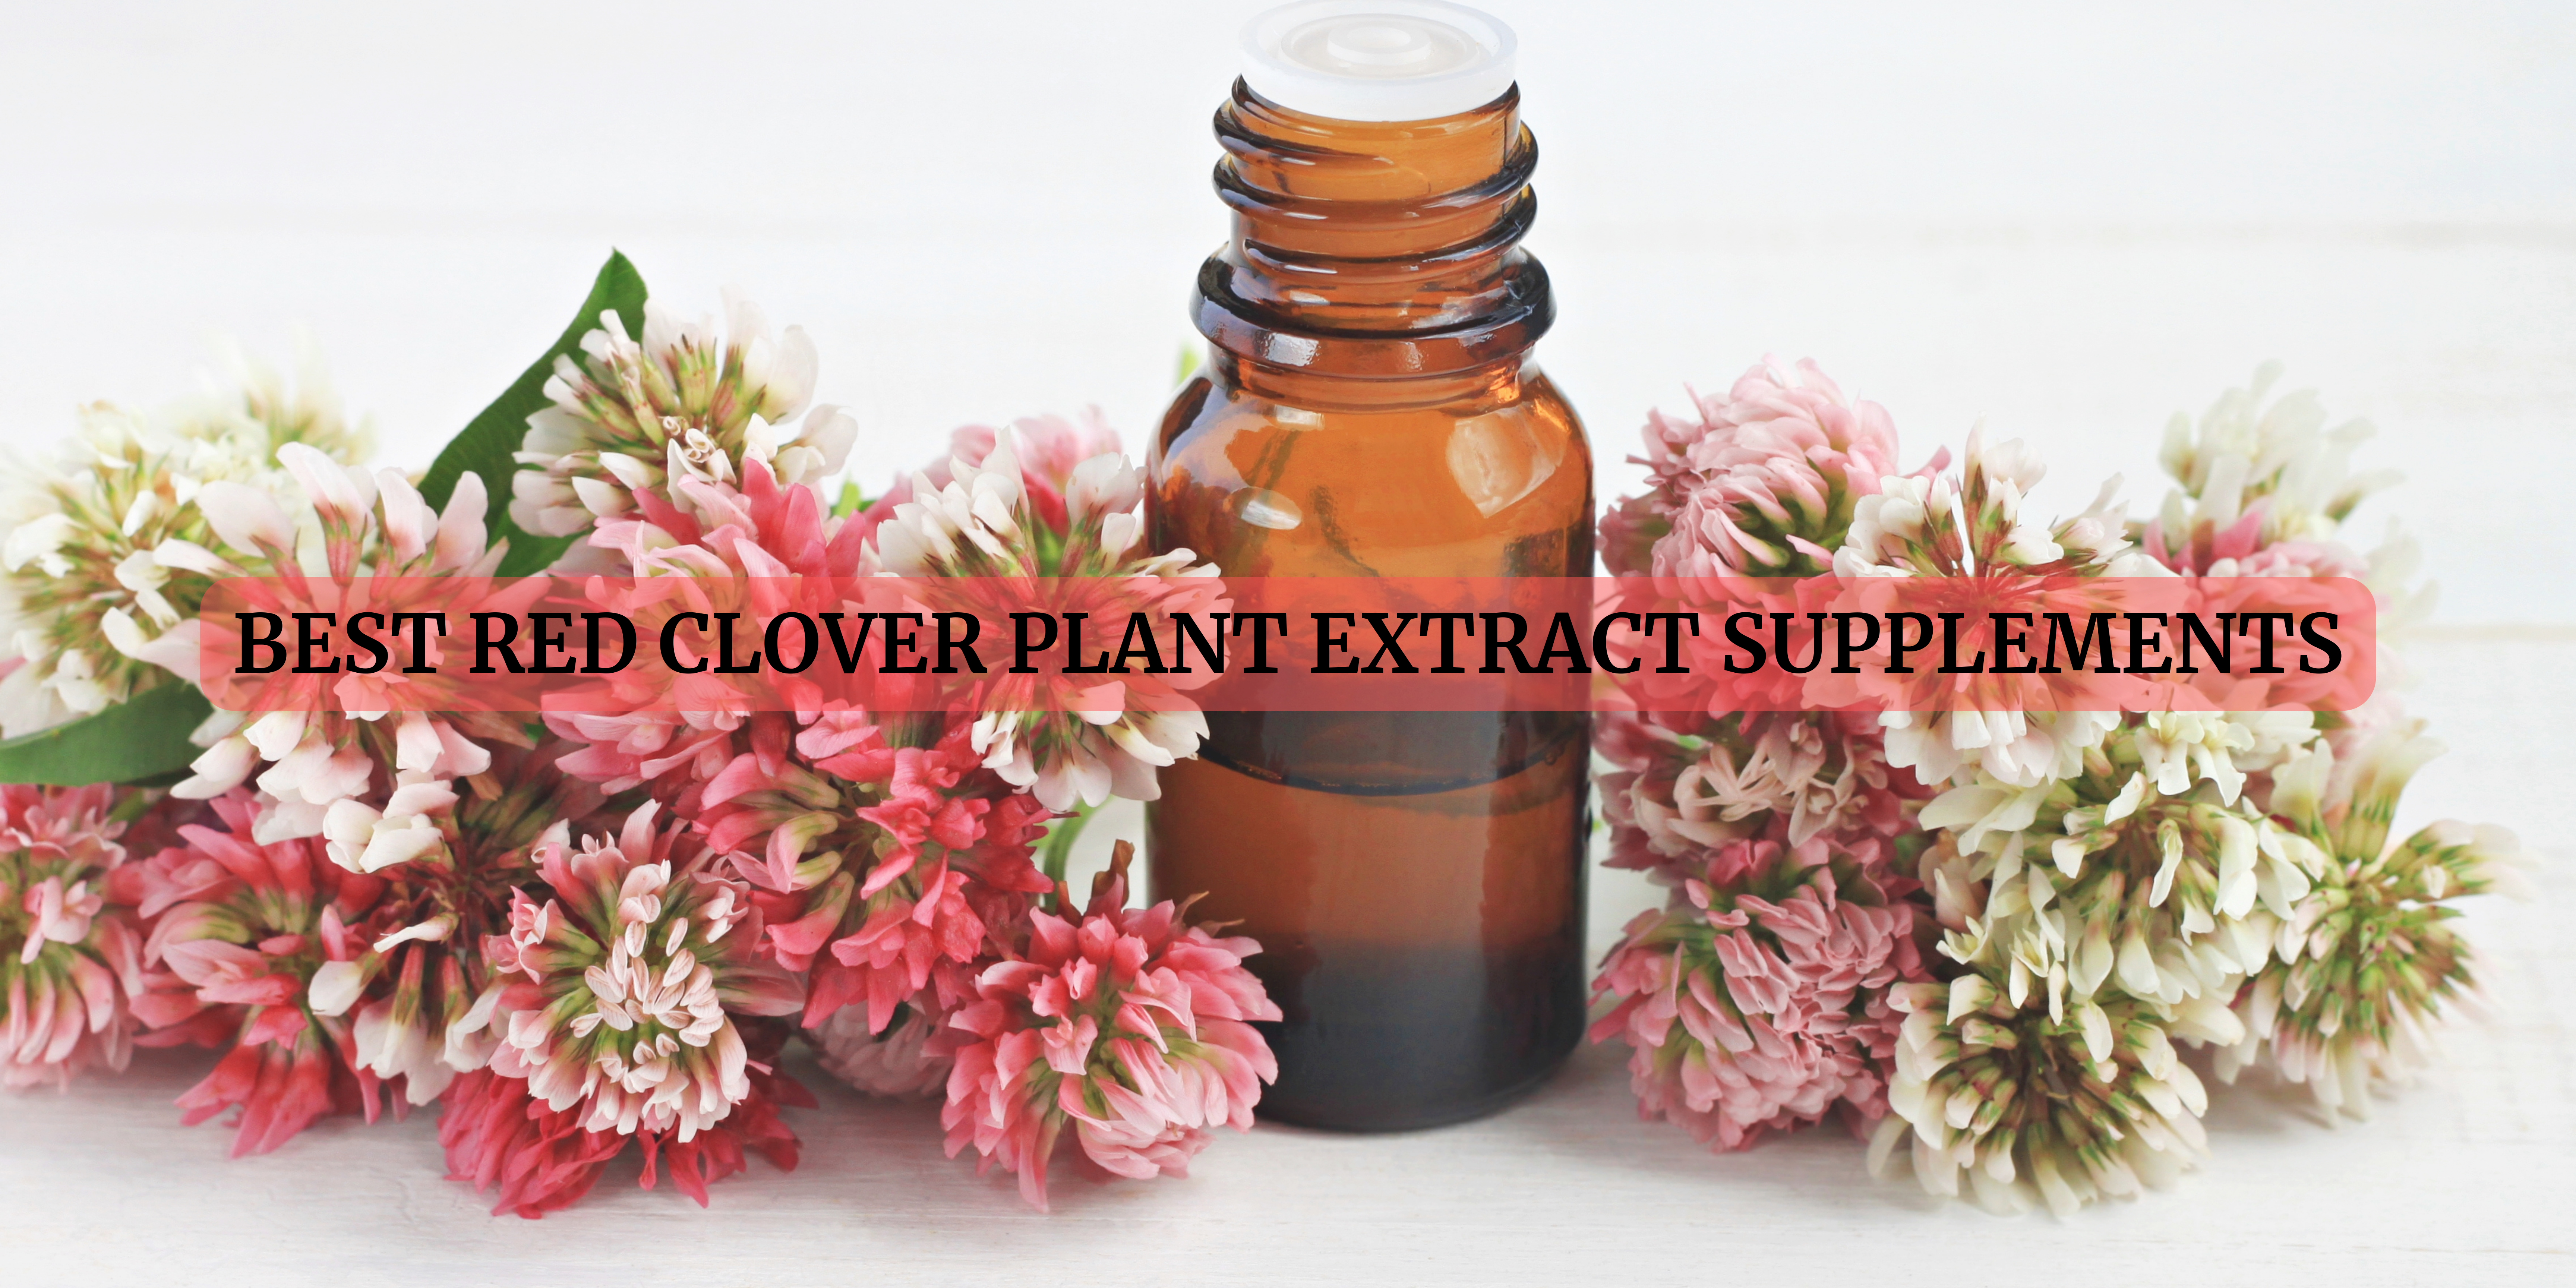 red clover extract supplements in Sweden